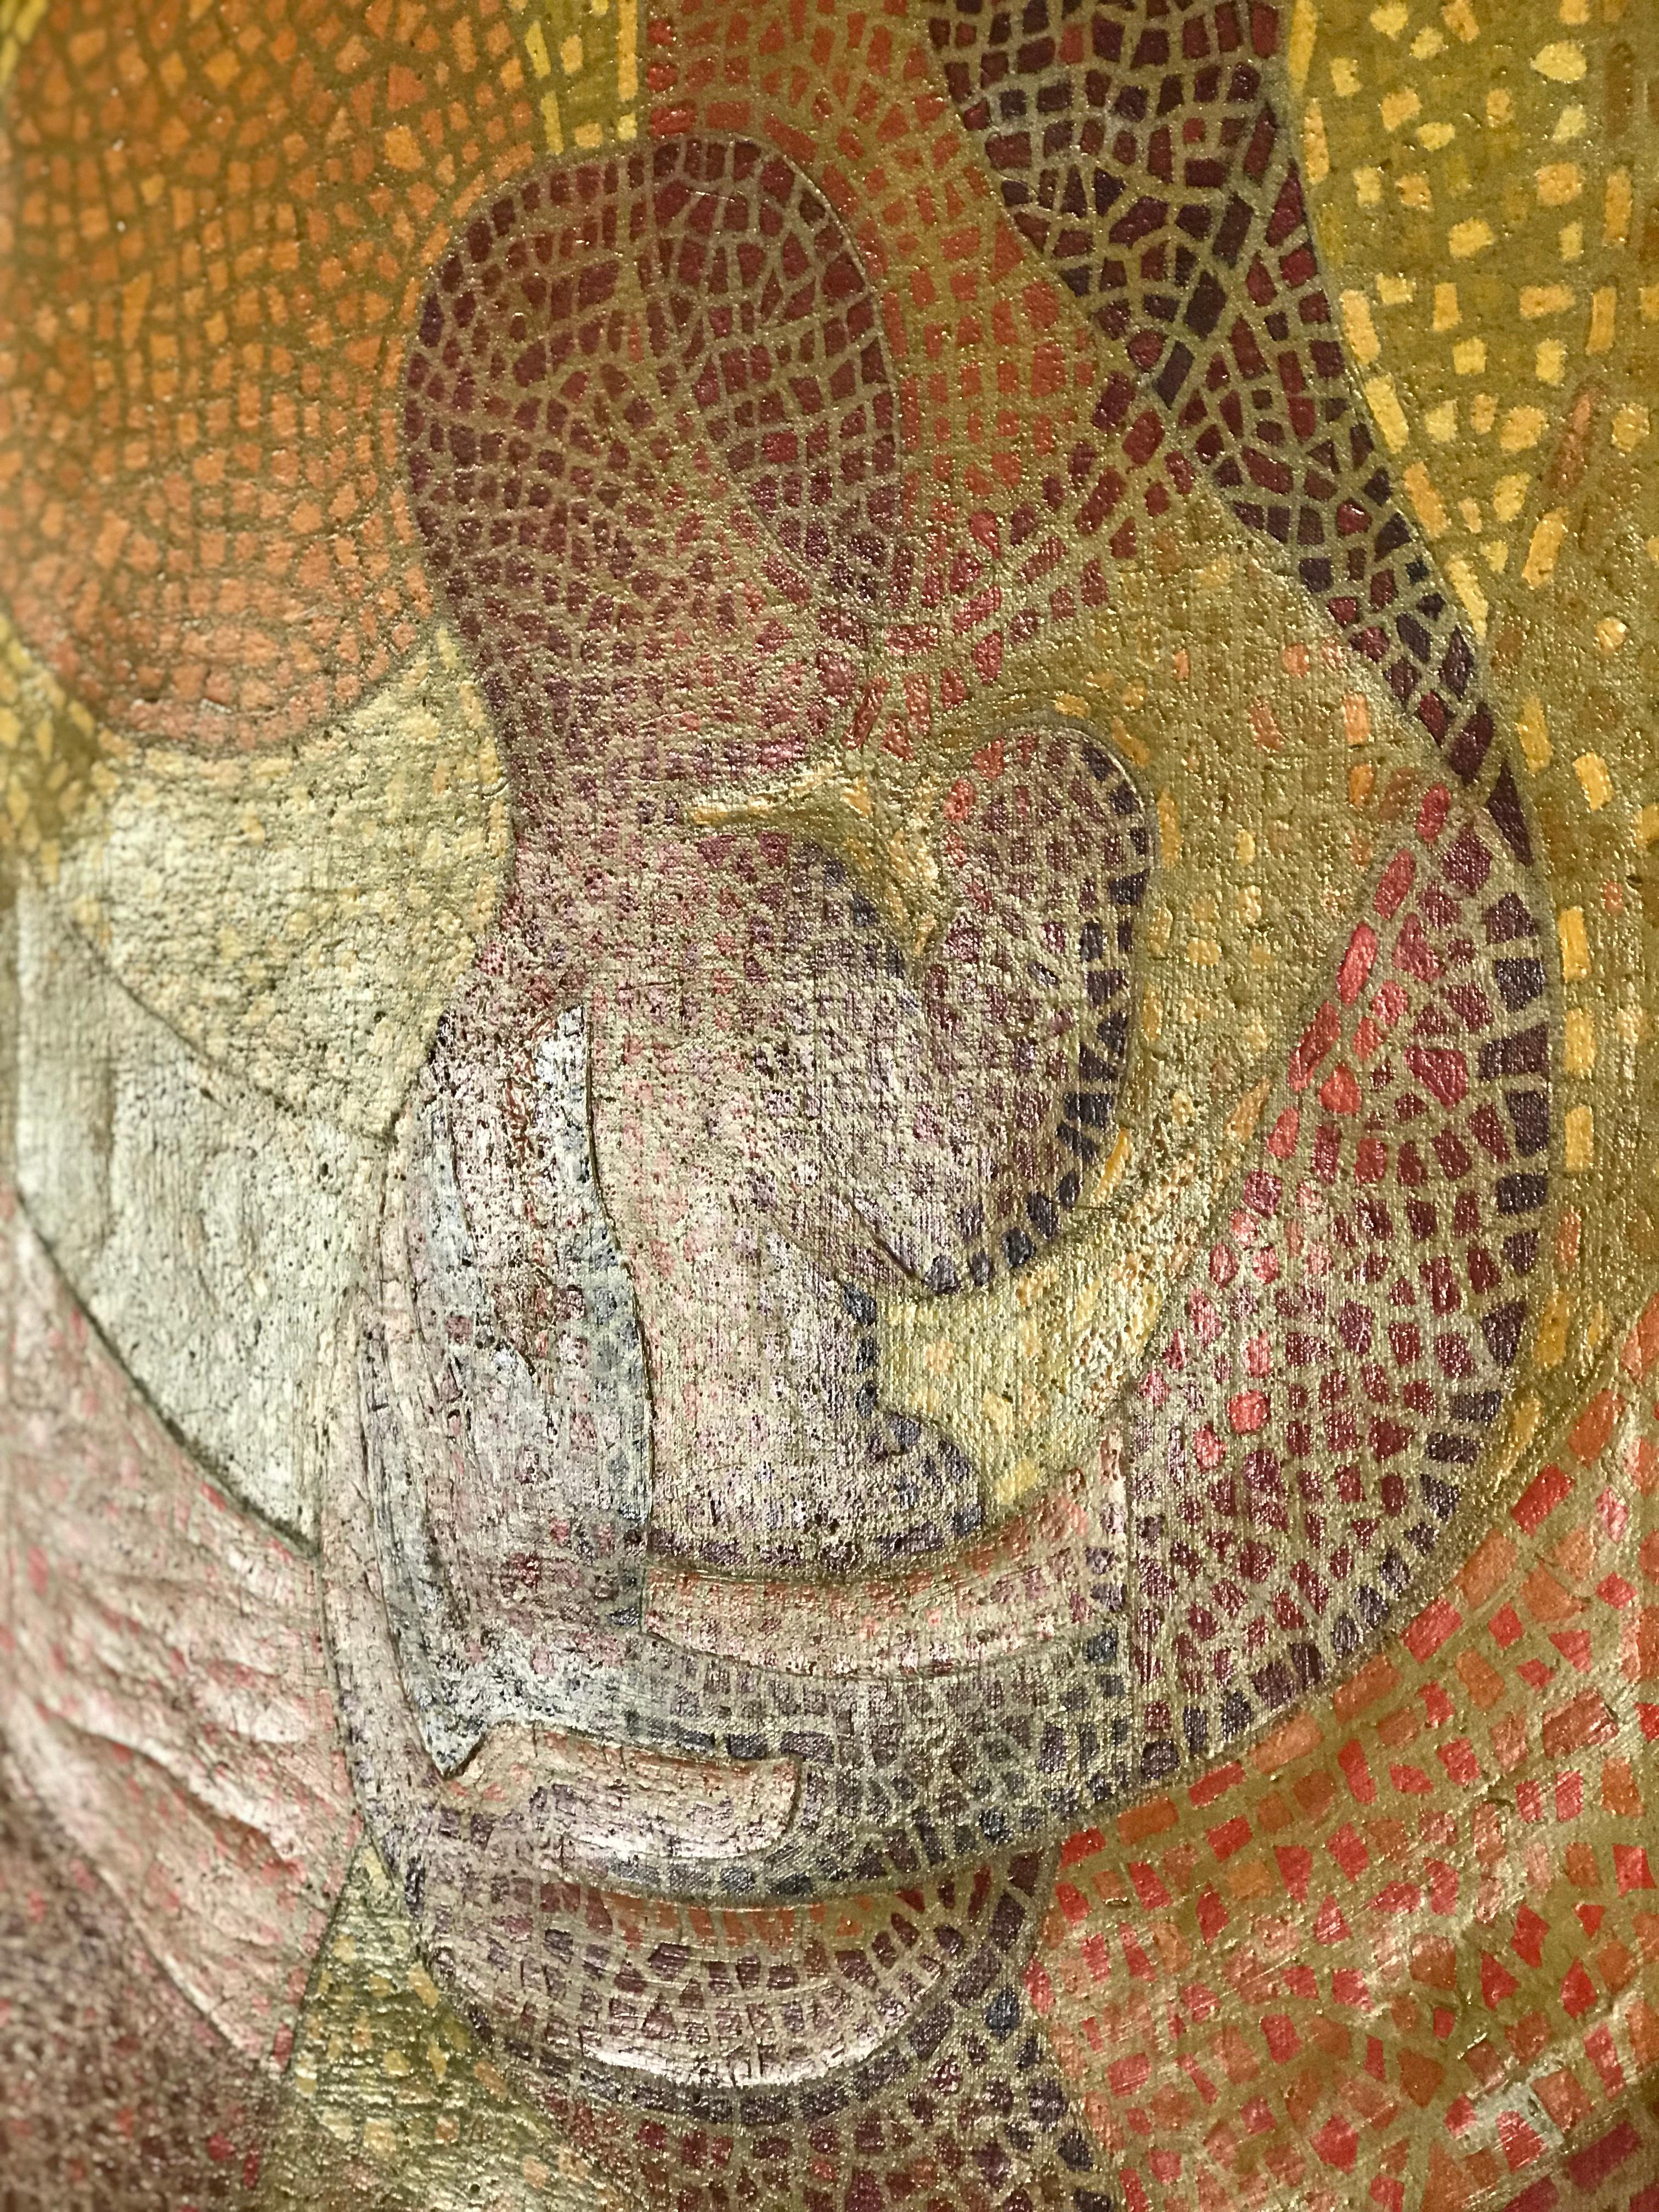 Brushed Madonna Mother & Child Mosaic Painting by Olav Mathiesen, Oil on Canvas, 1963